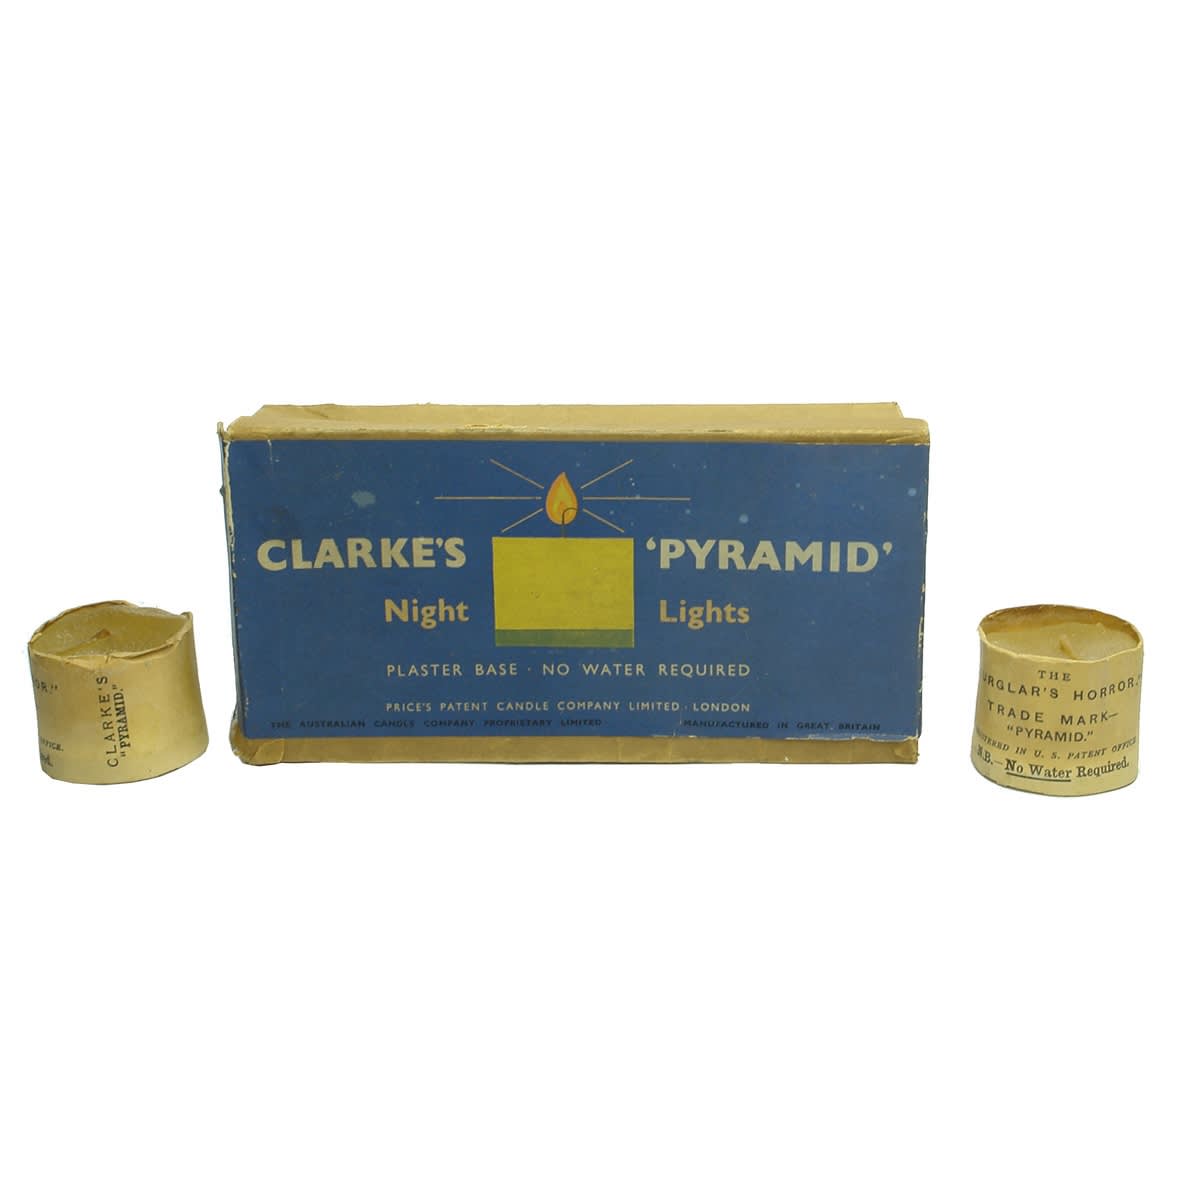 Cardboard Box with two candles. Clarke's Pyramid Night Lights. Price's Patent Candle Company. Burglar's Horror.